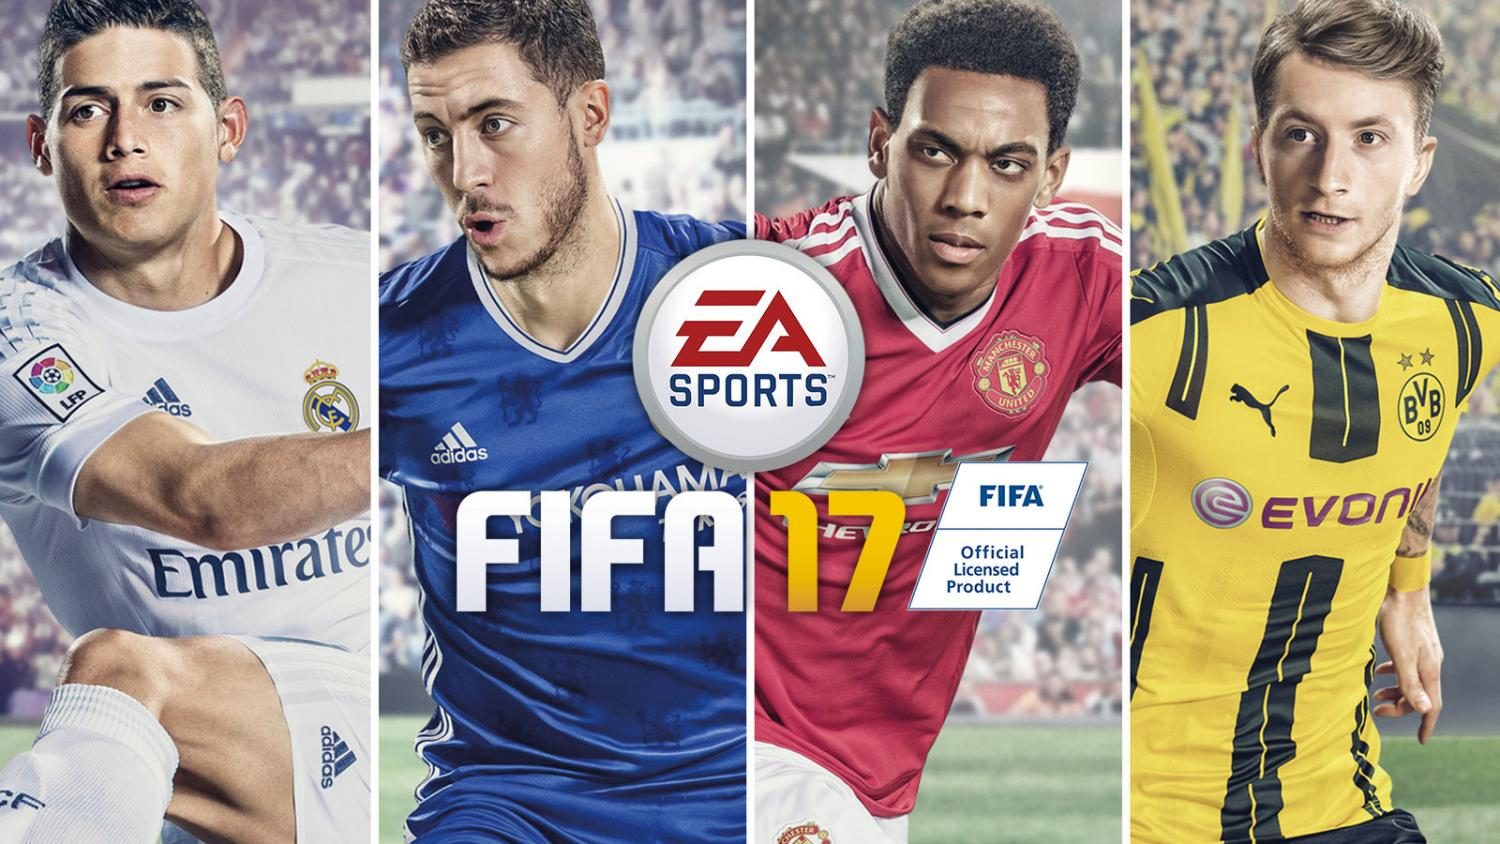 Video Game Review: FIFA 17